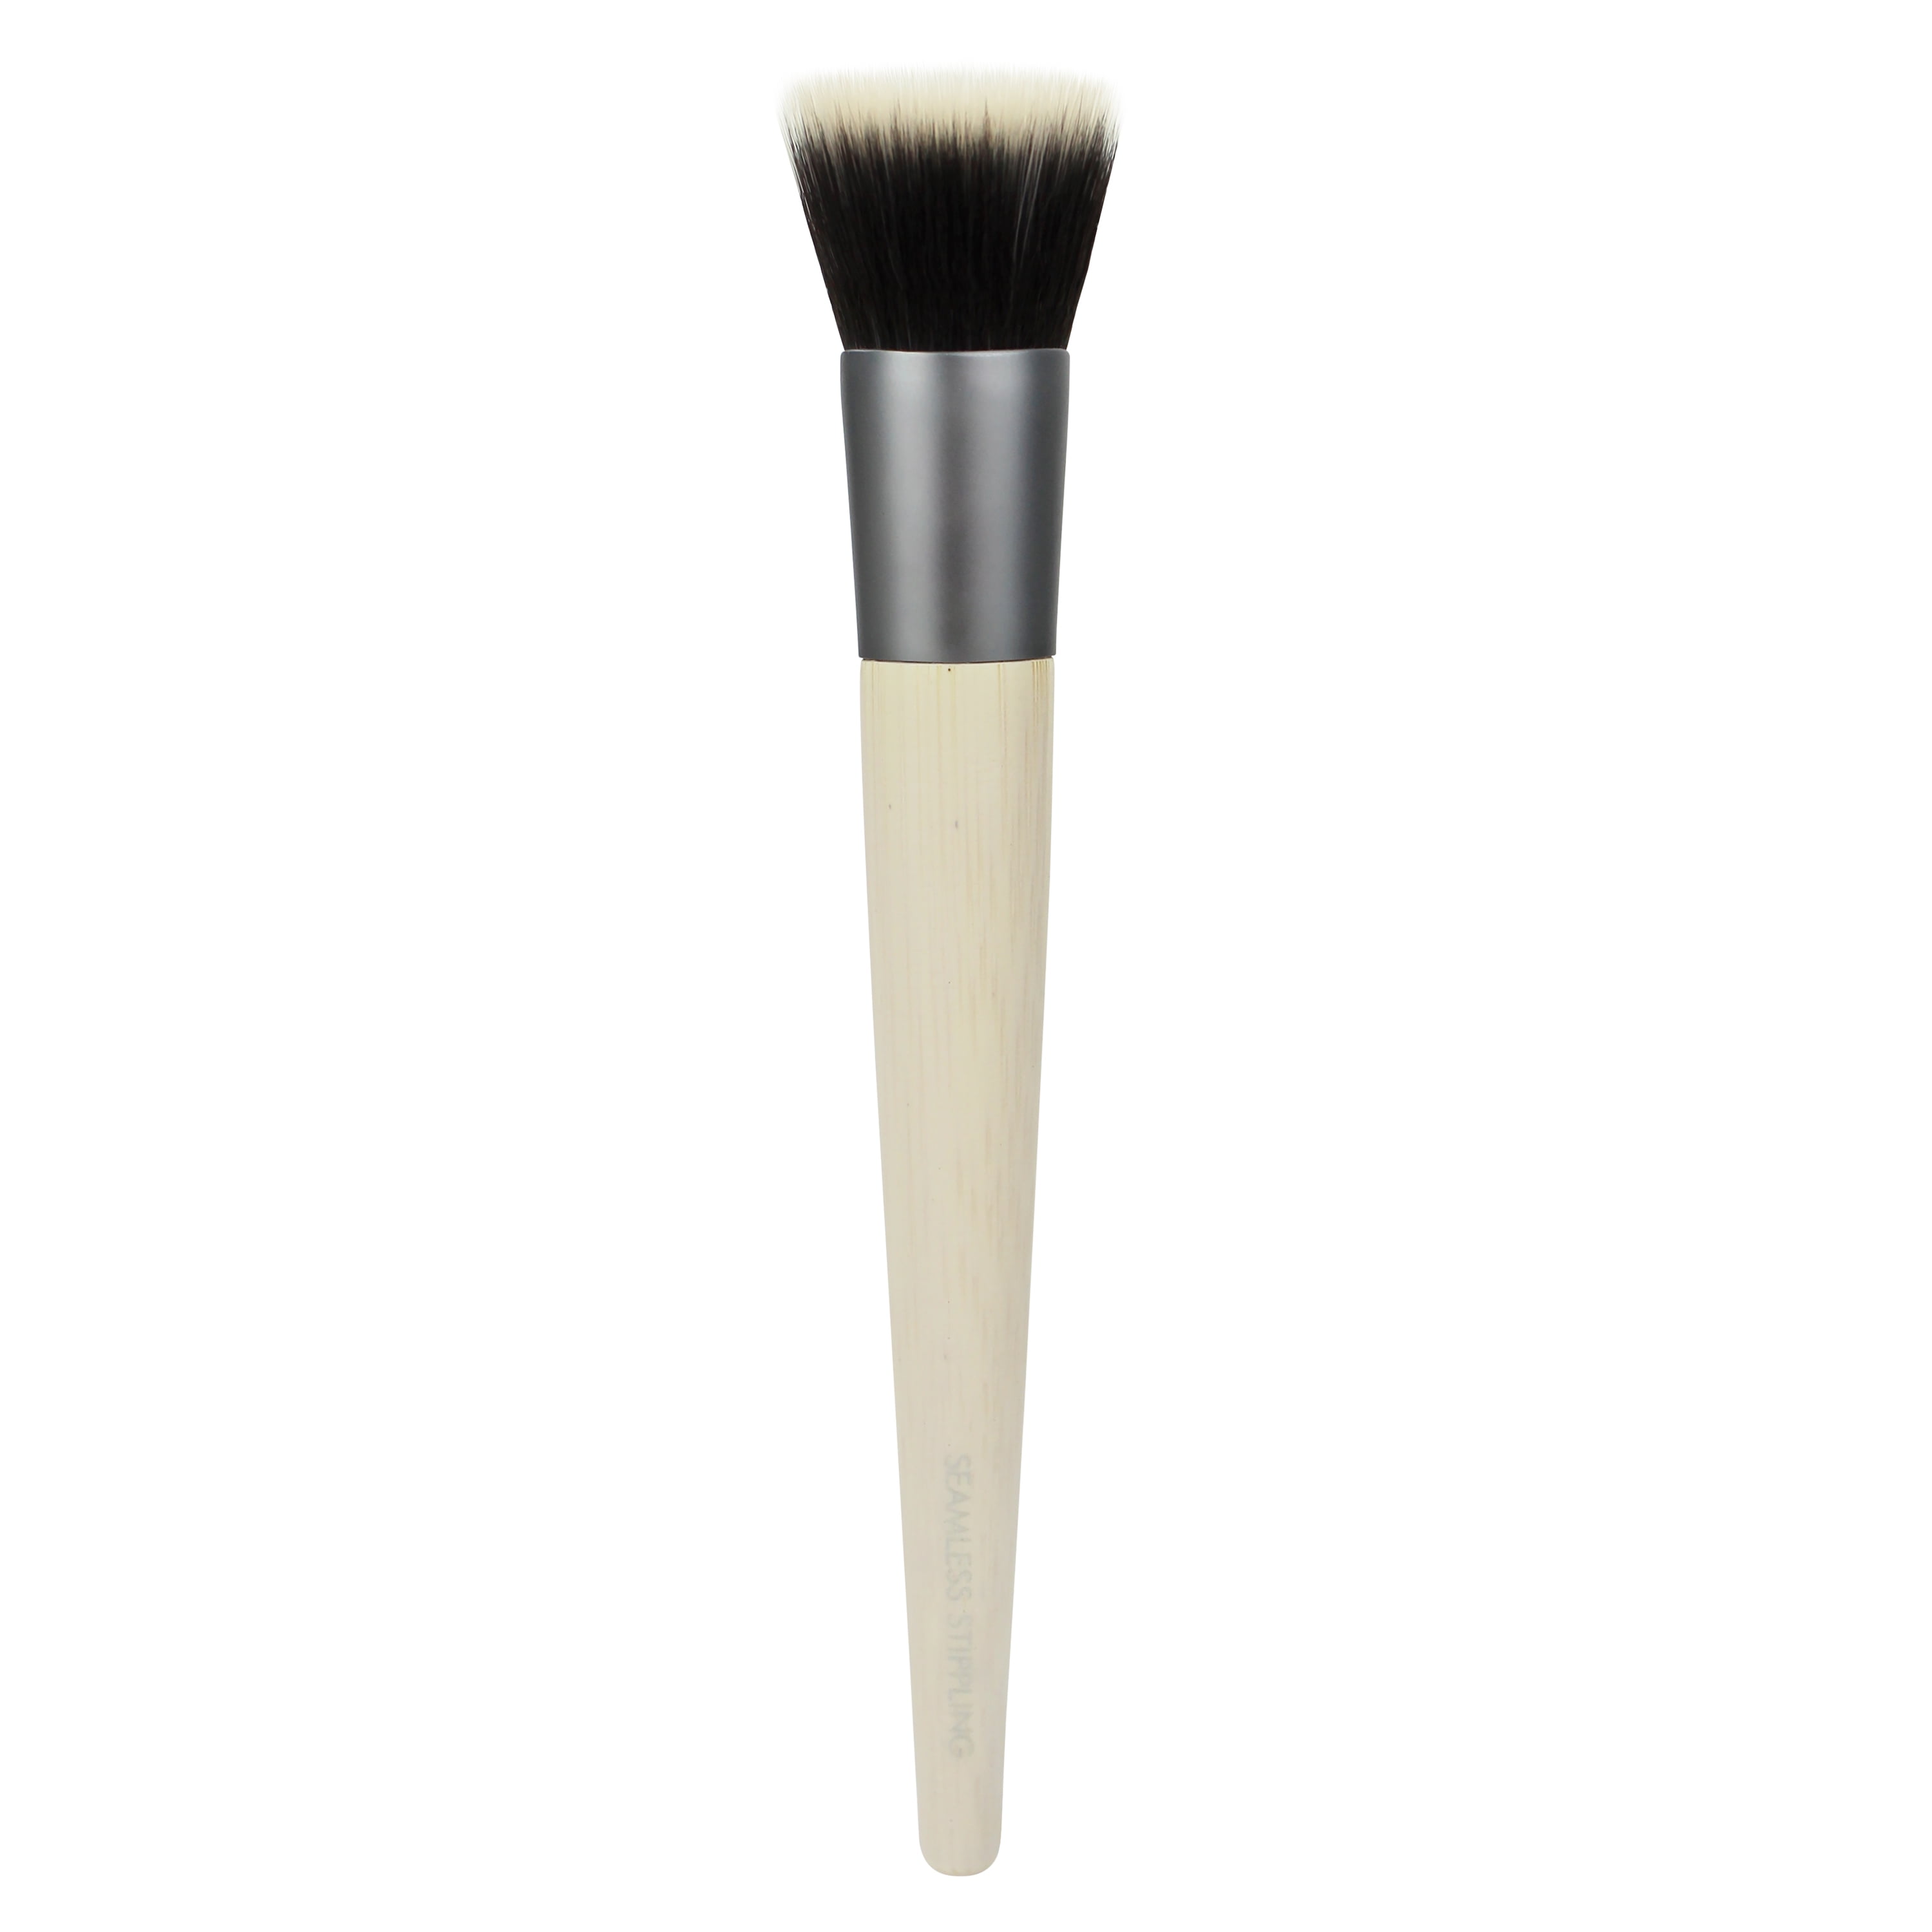 Flat Top Stippling Brush - Spa Supplies - Appearus Products